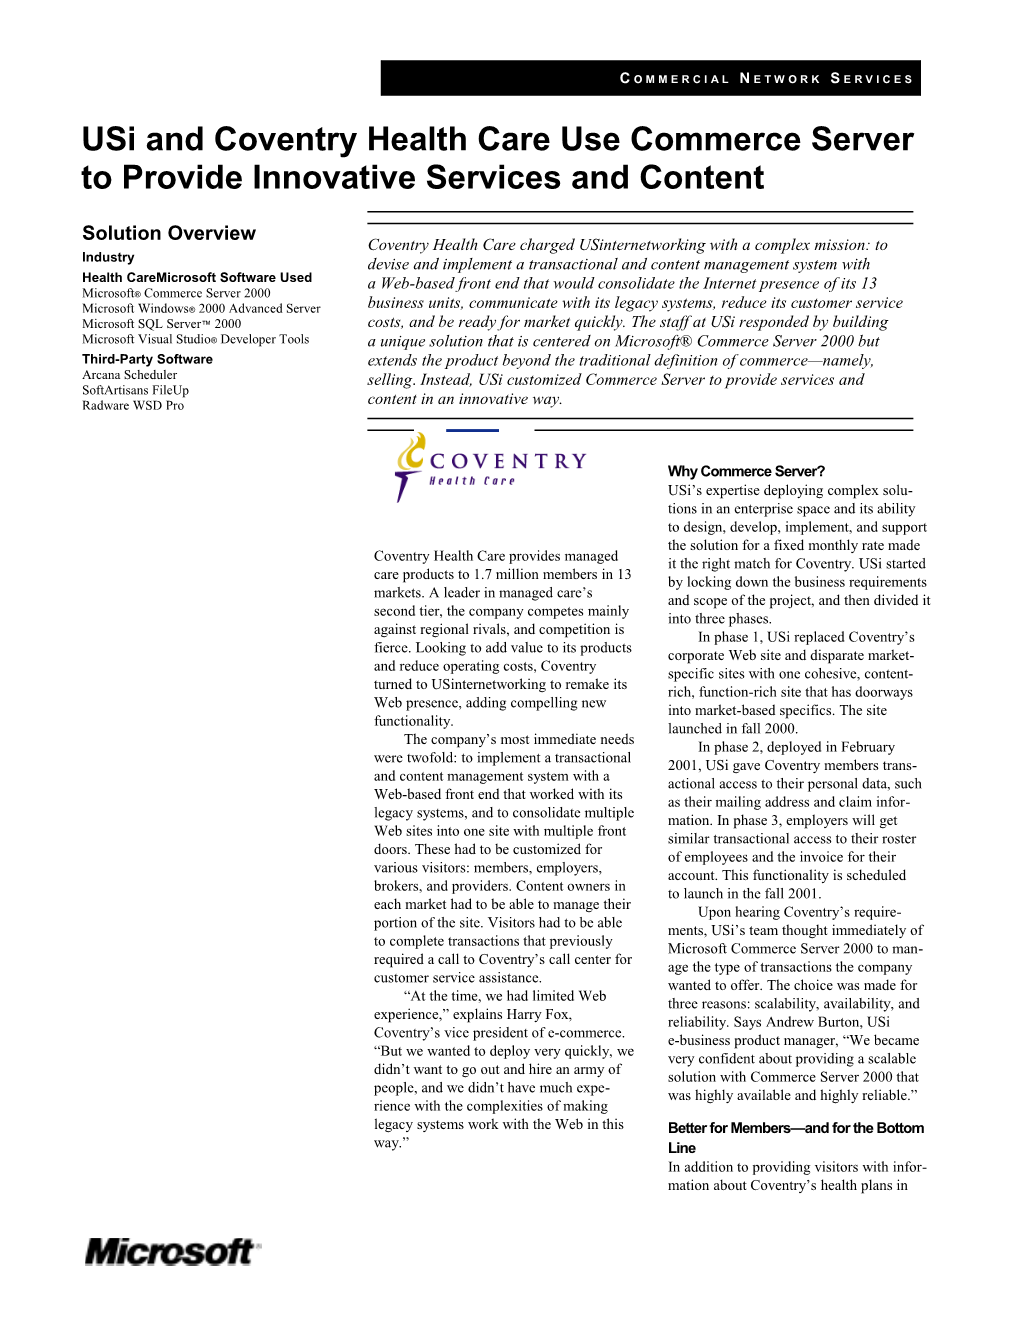 Usi and Coventry Health Care Use Commerce Server to Provide Innovative Services and Content